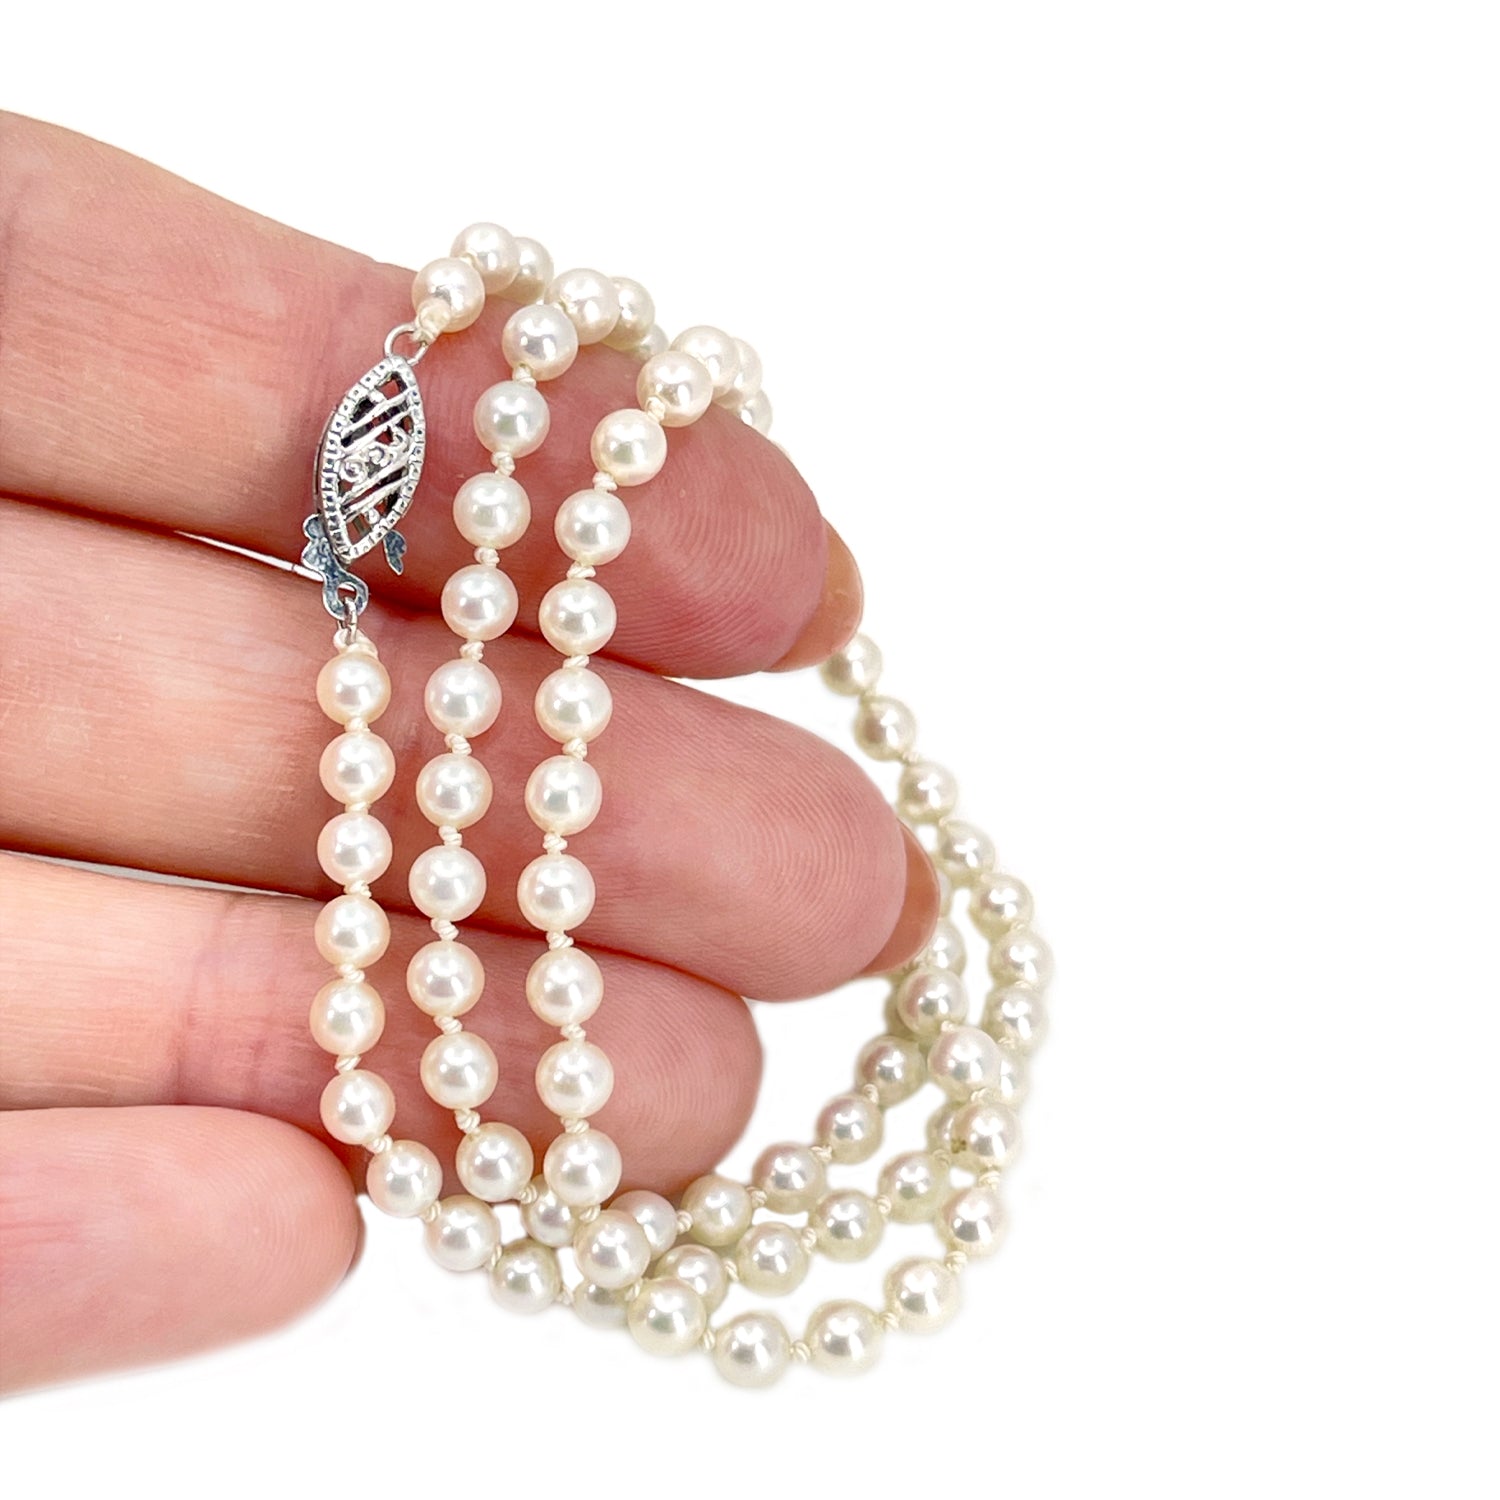 Seed Pearl Vintage Japanese Saltwater Cultured Akoya Pearl Necklace - 10K White Gold 16.75 Inch